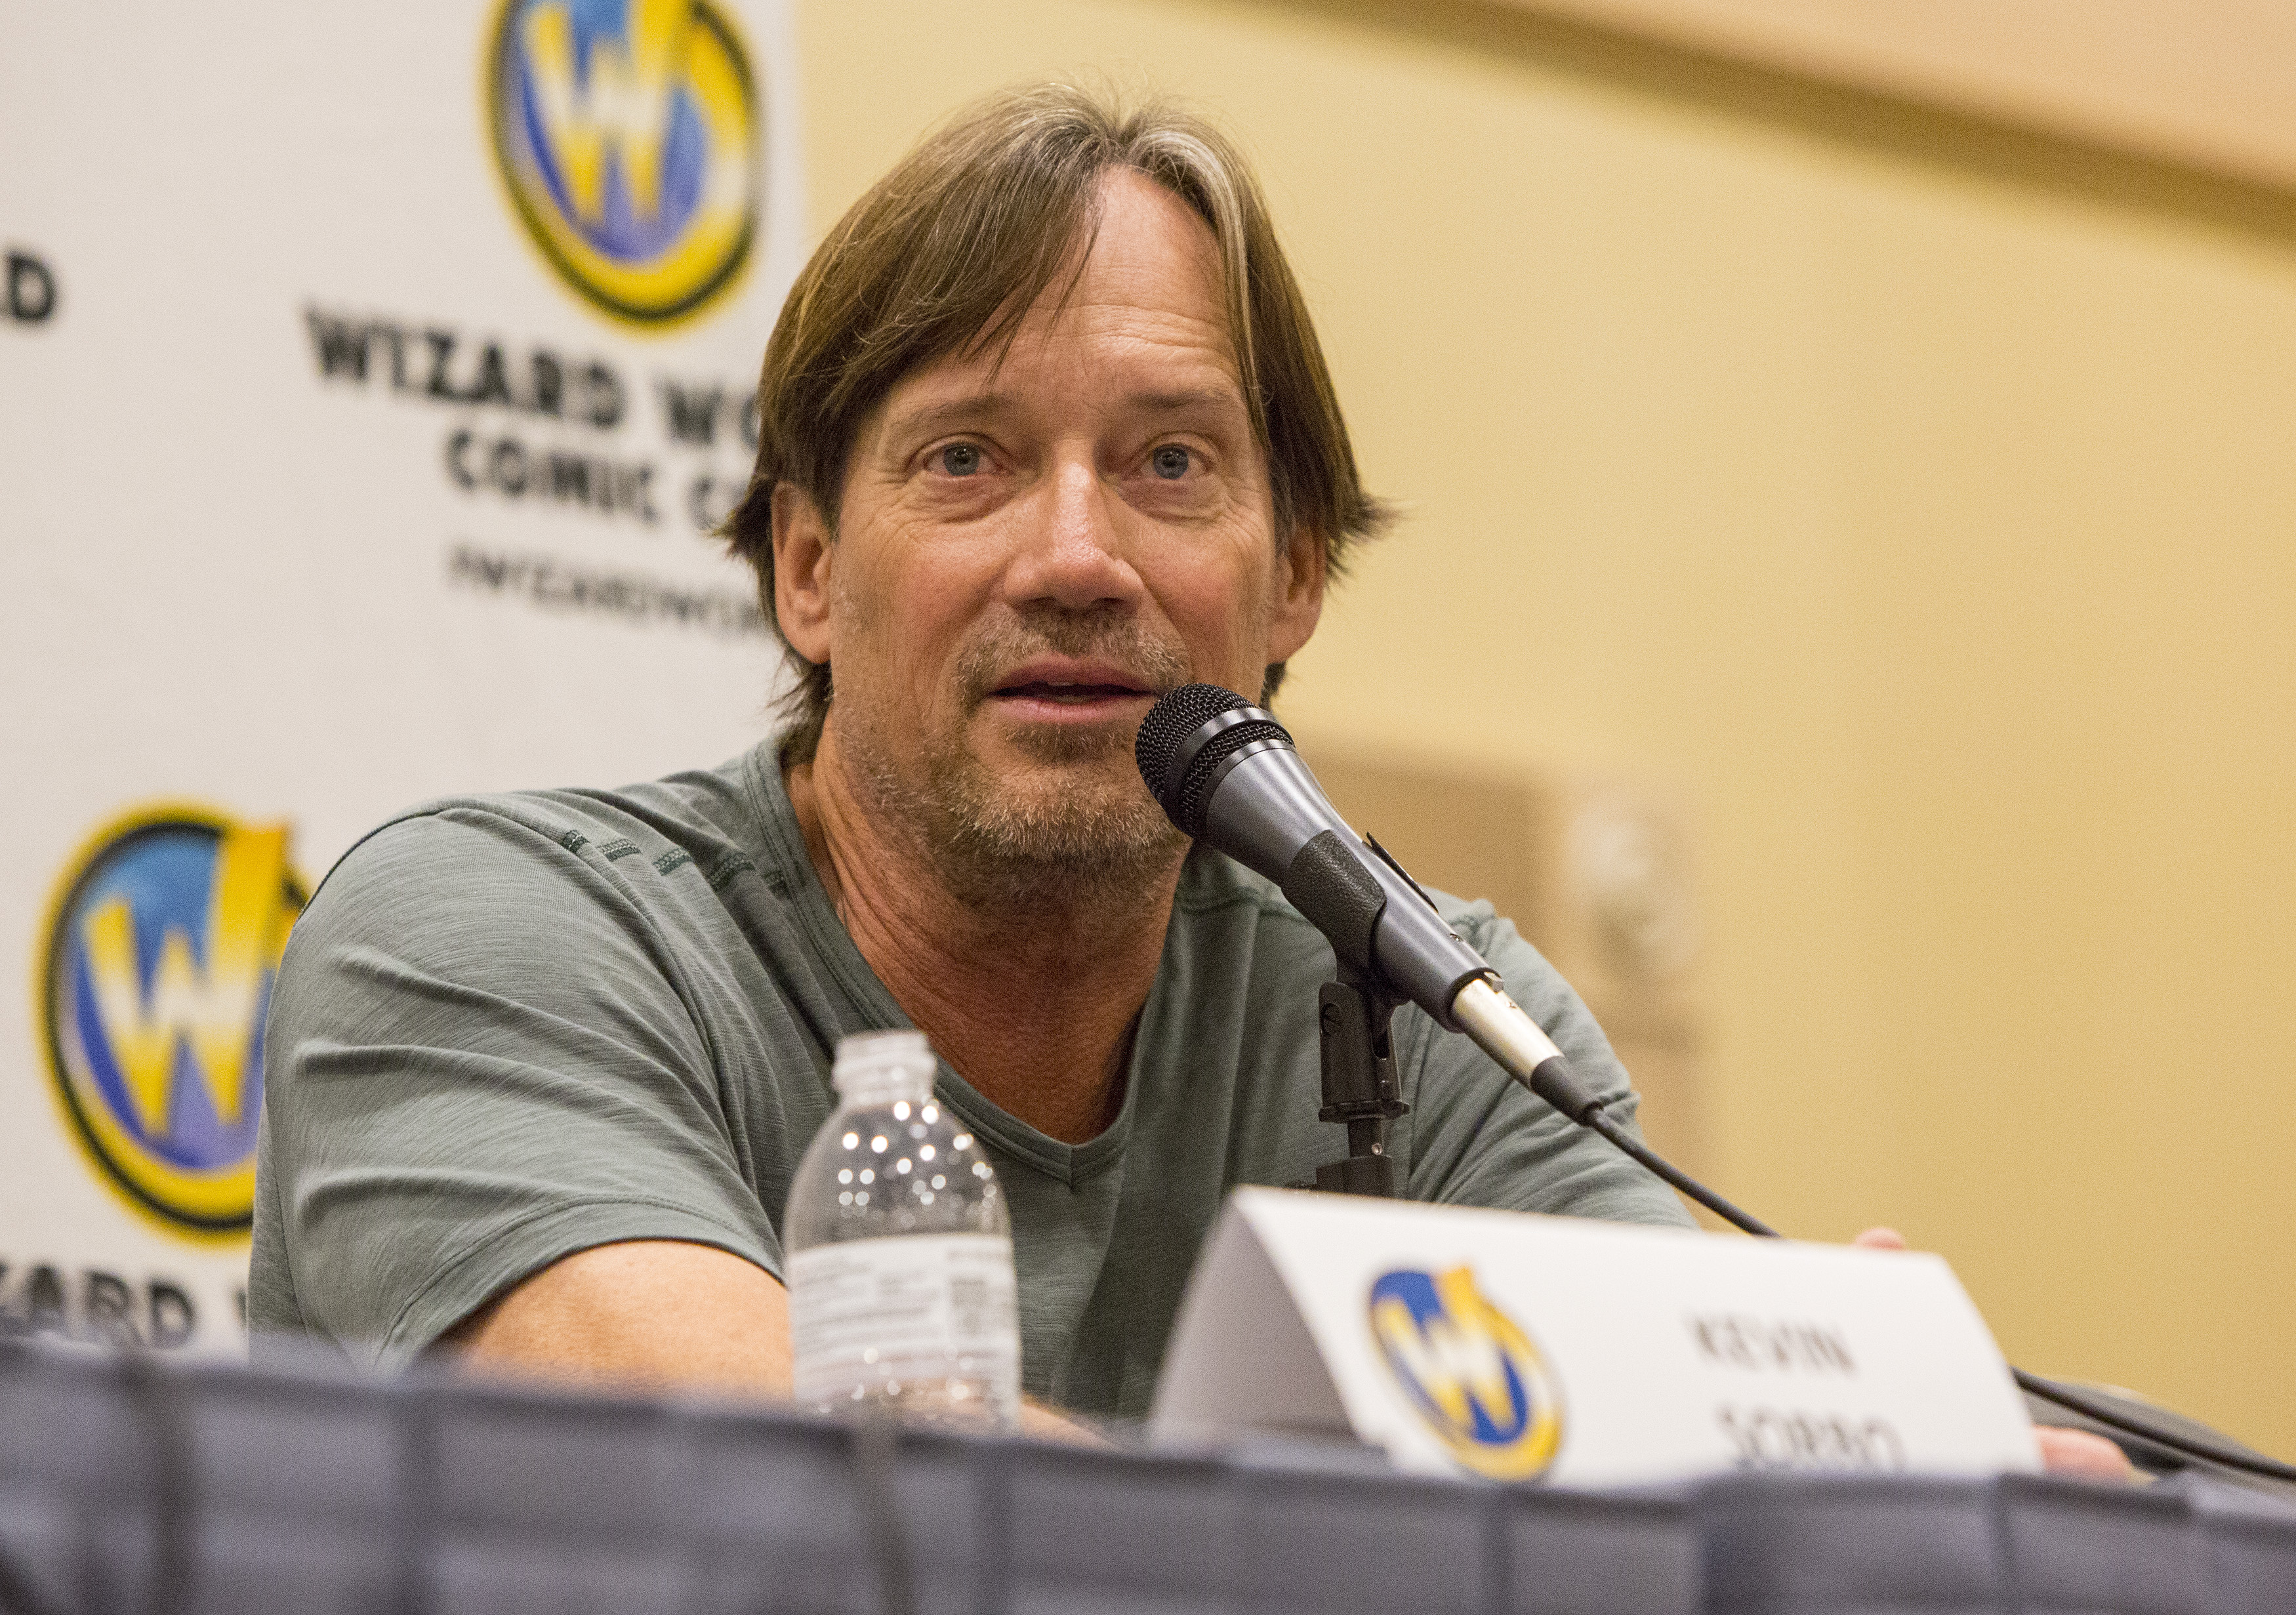 Kevin Sorbo at Wizard World Chicago Comic-Con in Rosemont, Illinois on August 27, 2017 | Source: Getty Images